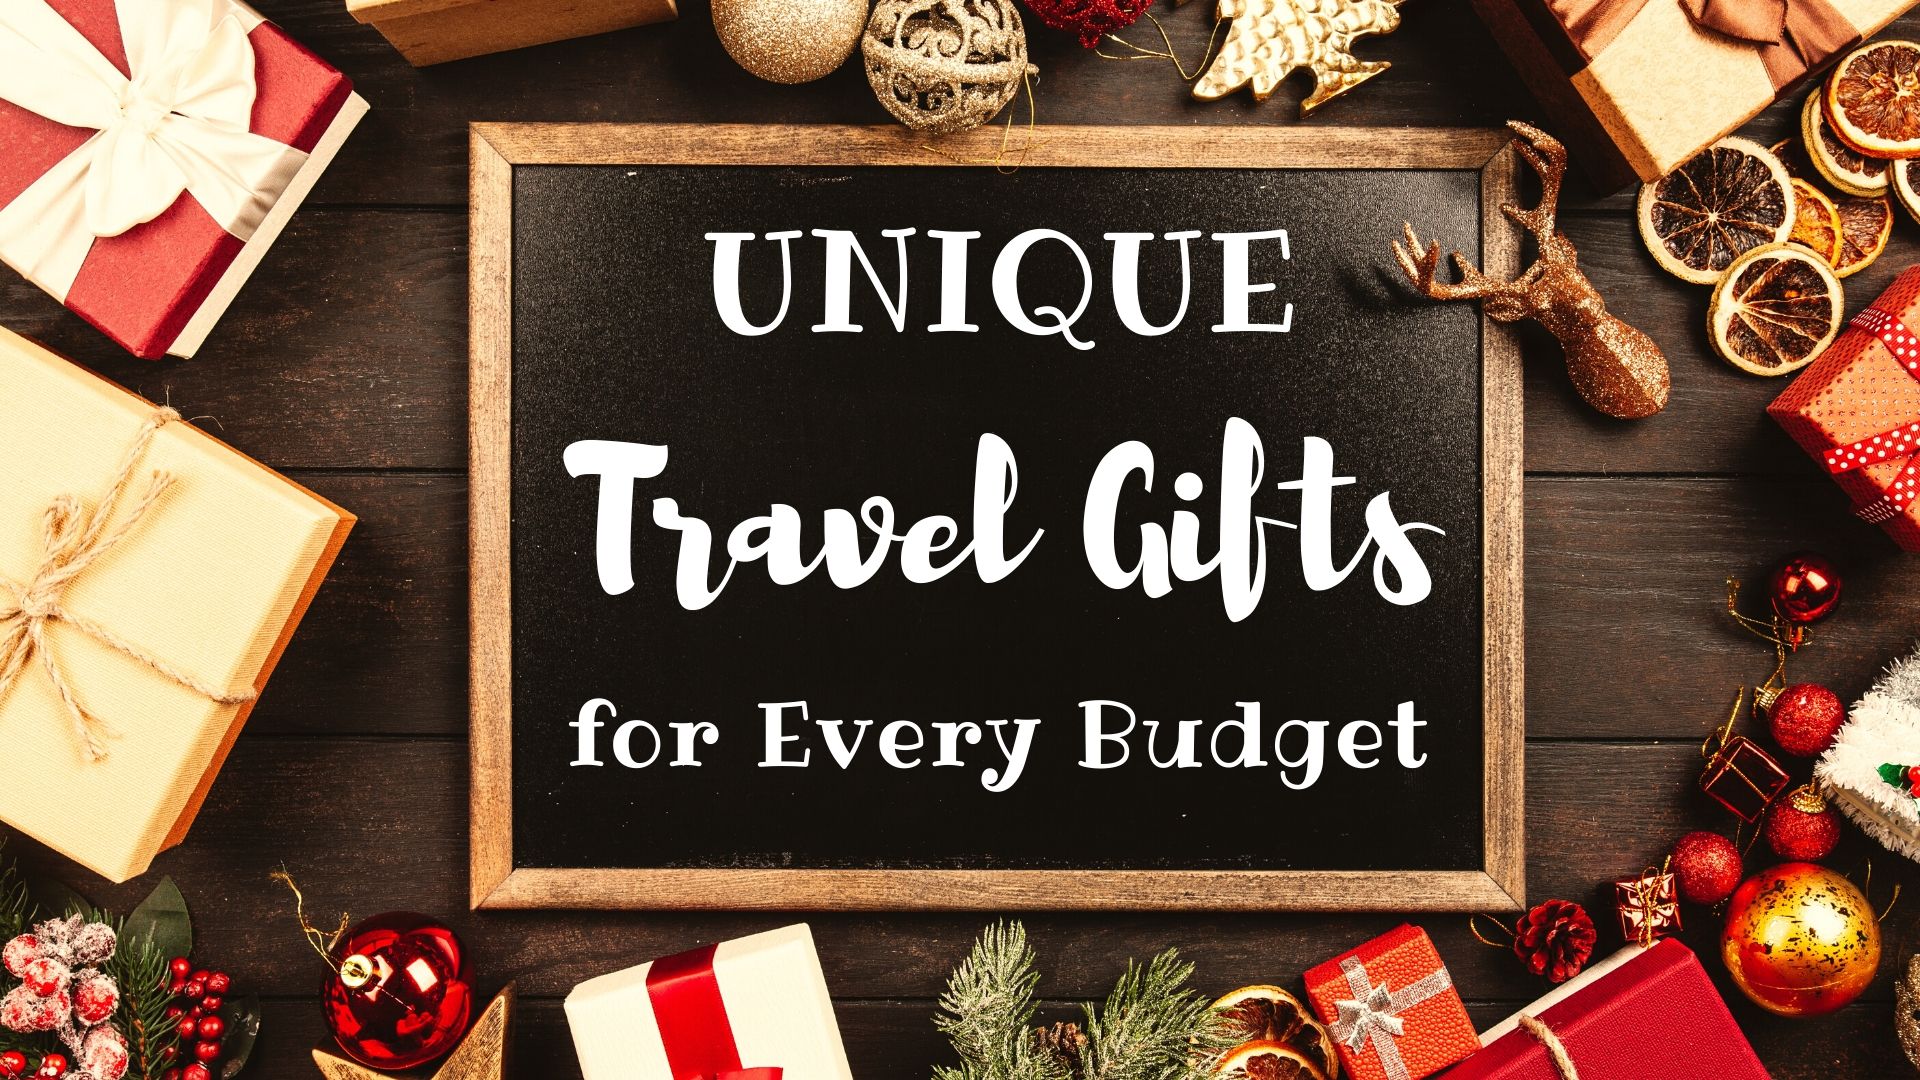 10 Fun And Affordable Gift Ideas For Women Under $25 Each